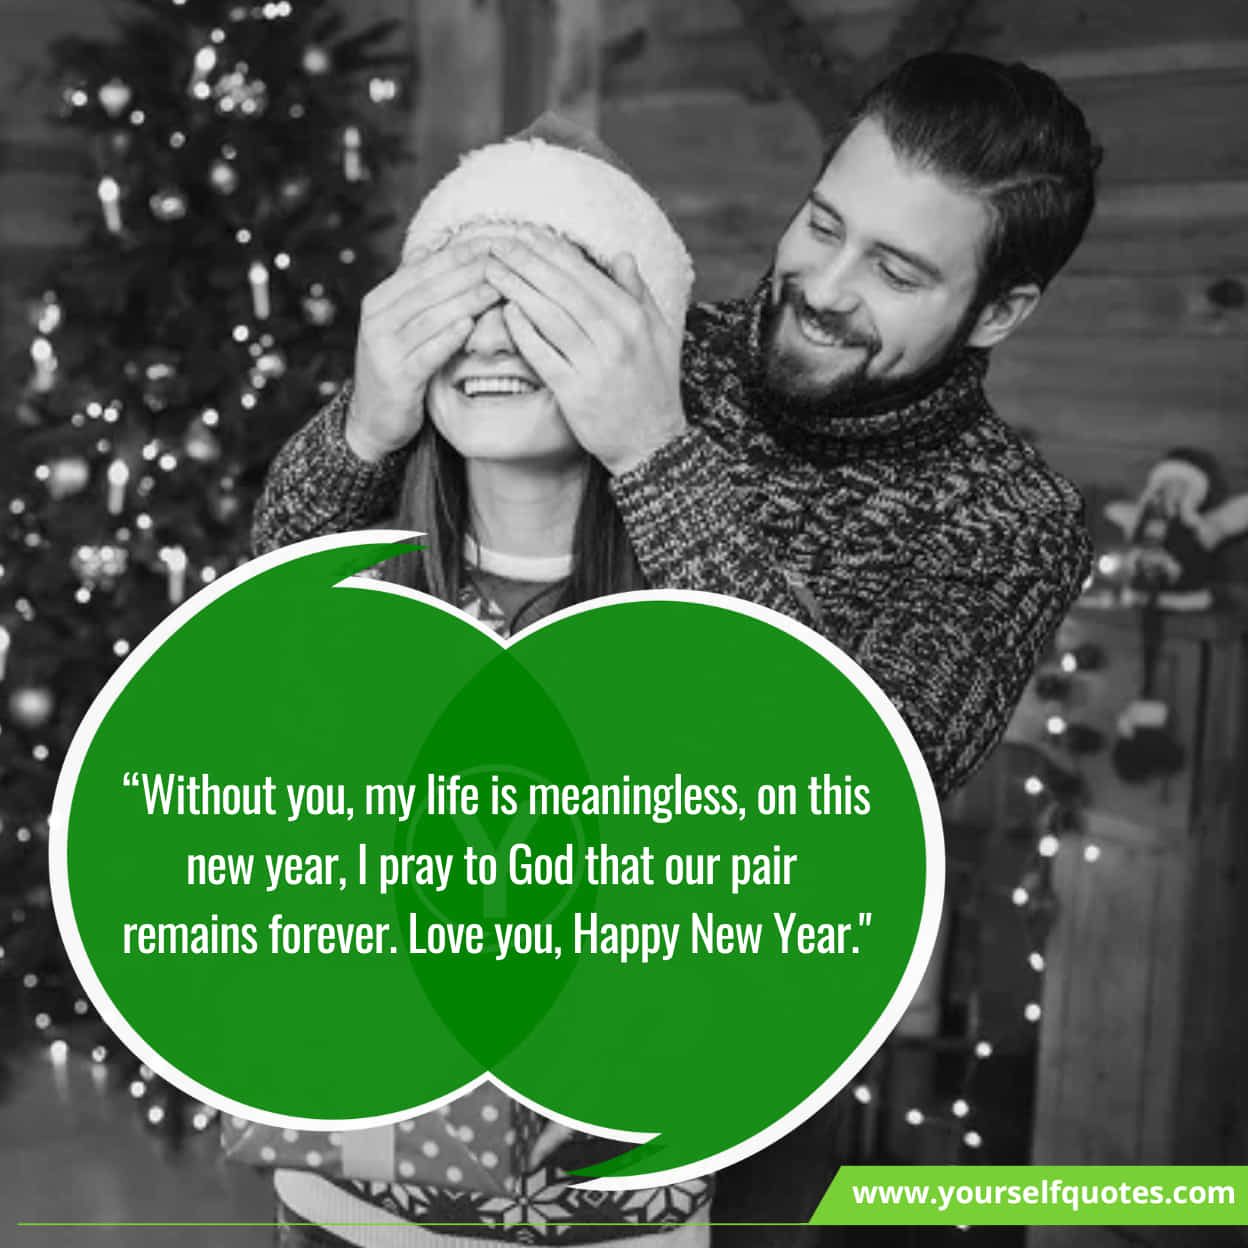 118 Happy New Year Wishes For Couples To Feel The New Year